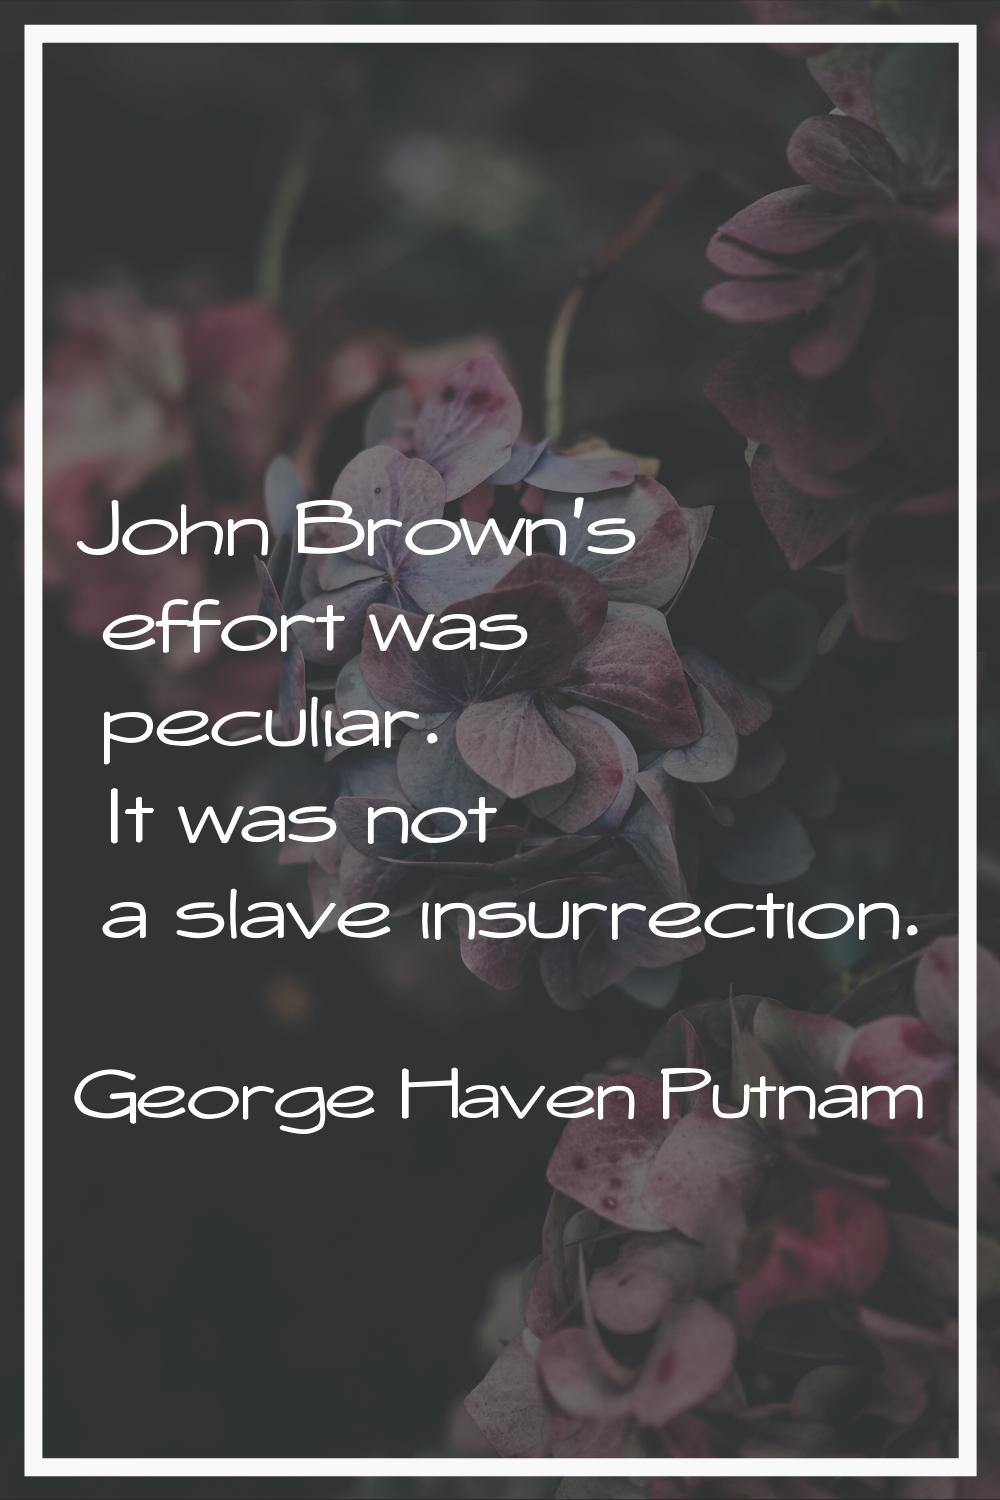 John Brown's effort was peculiar. It was not a slave insurrection.